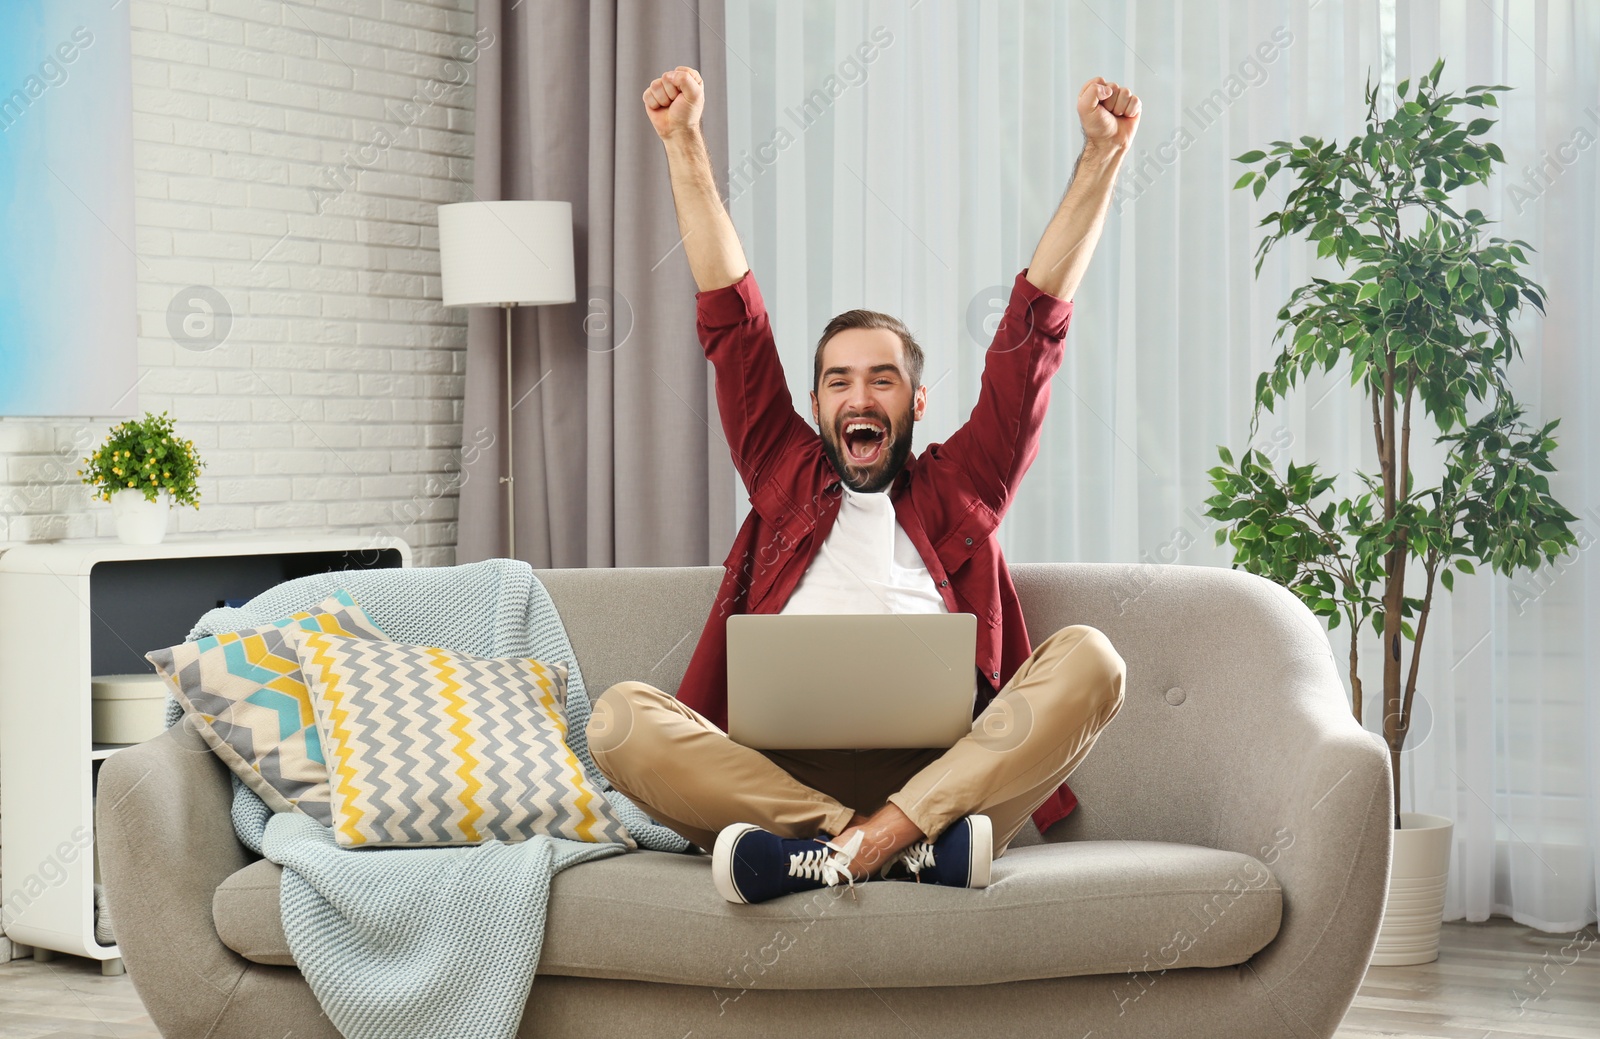 Photo of Emotional young man with laptop celebrating victory on sofa at home